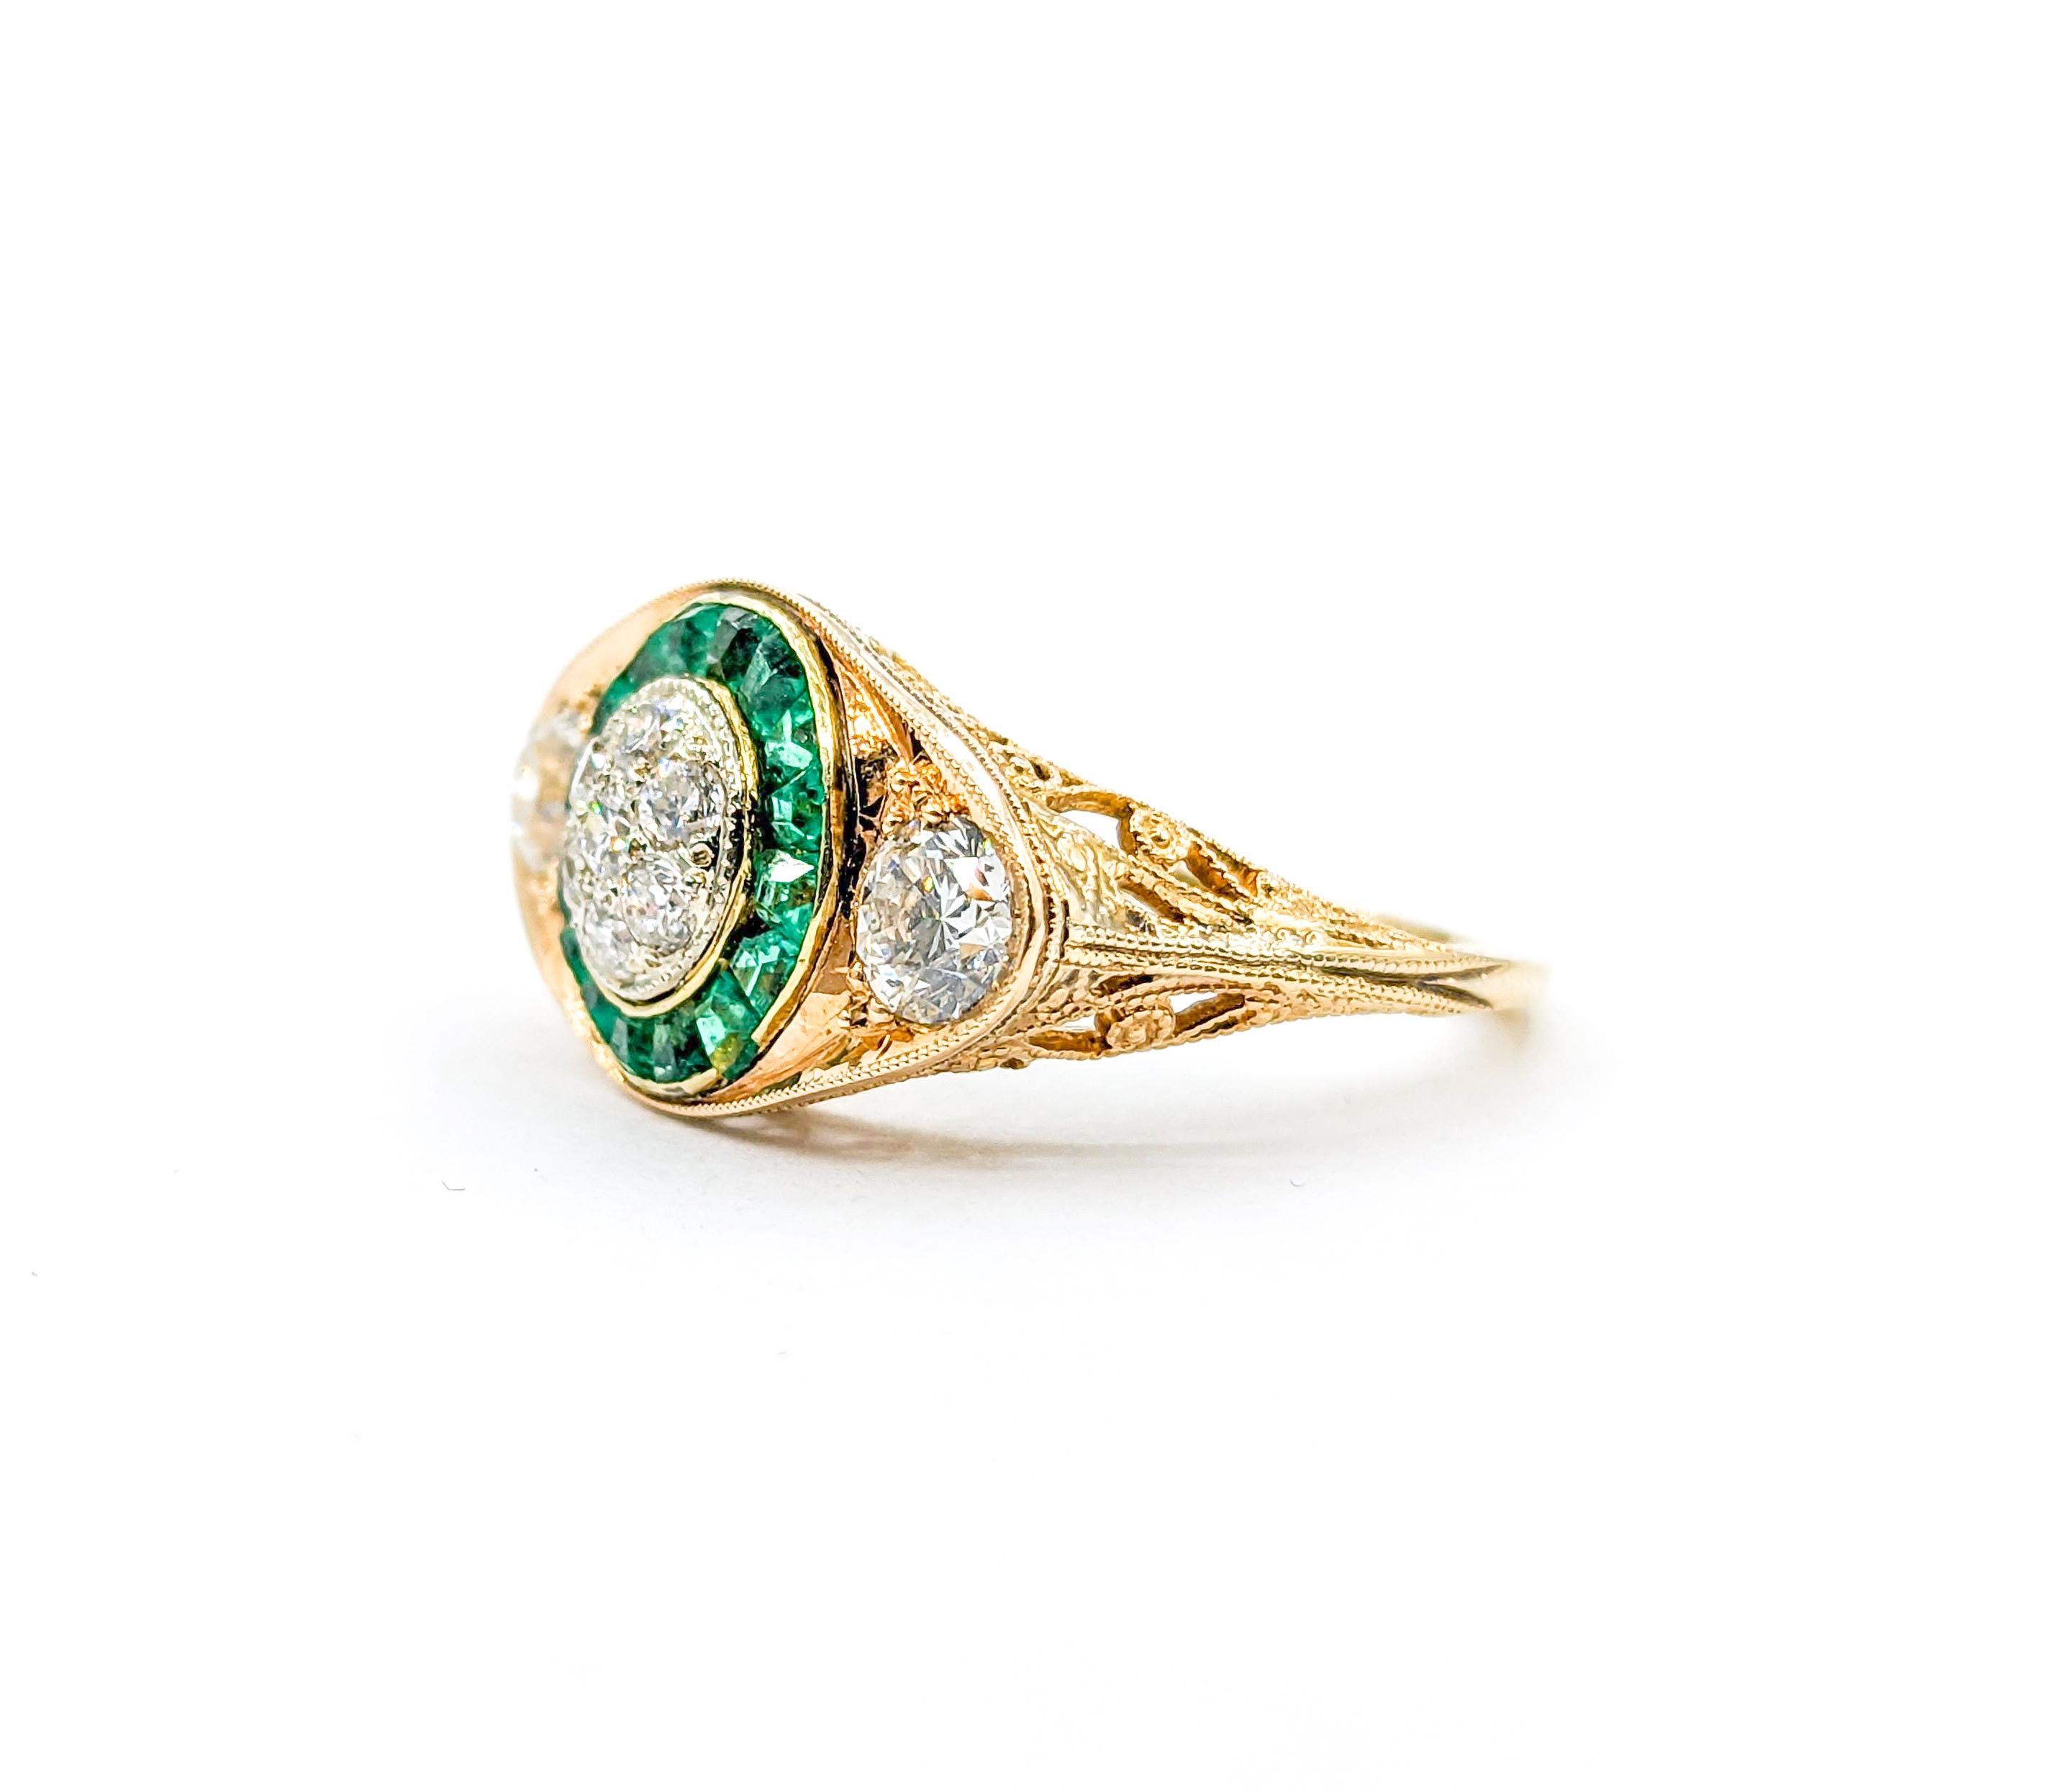 Antique Old European Diamond & Emeralds Target Ring in 14K Gold For Sale 5